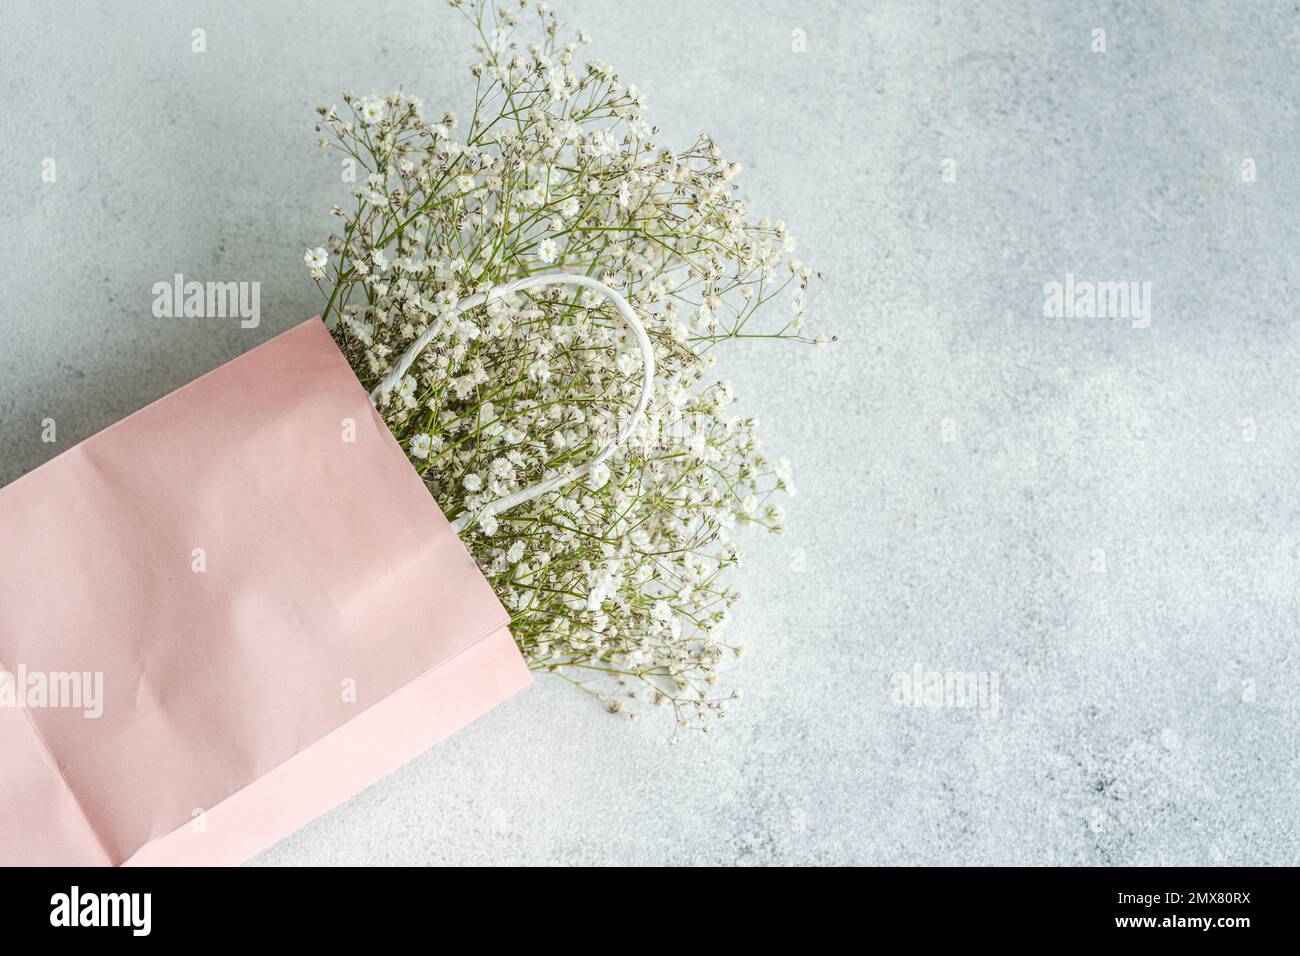 Pink paper bag and white Gypsophila flowers as a shopping concept Stock Photo